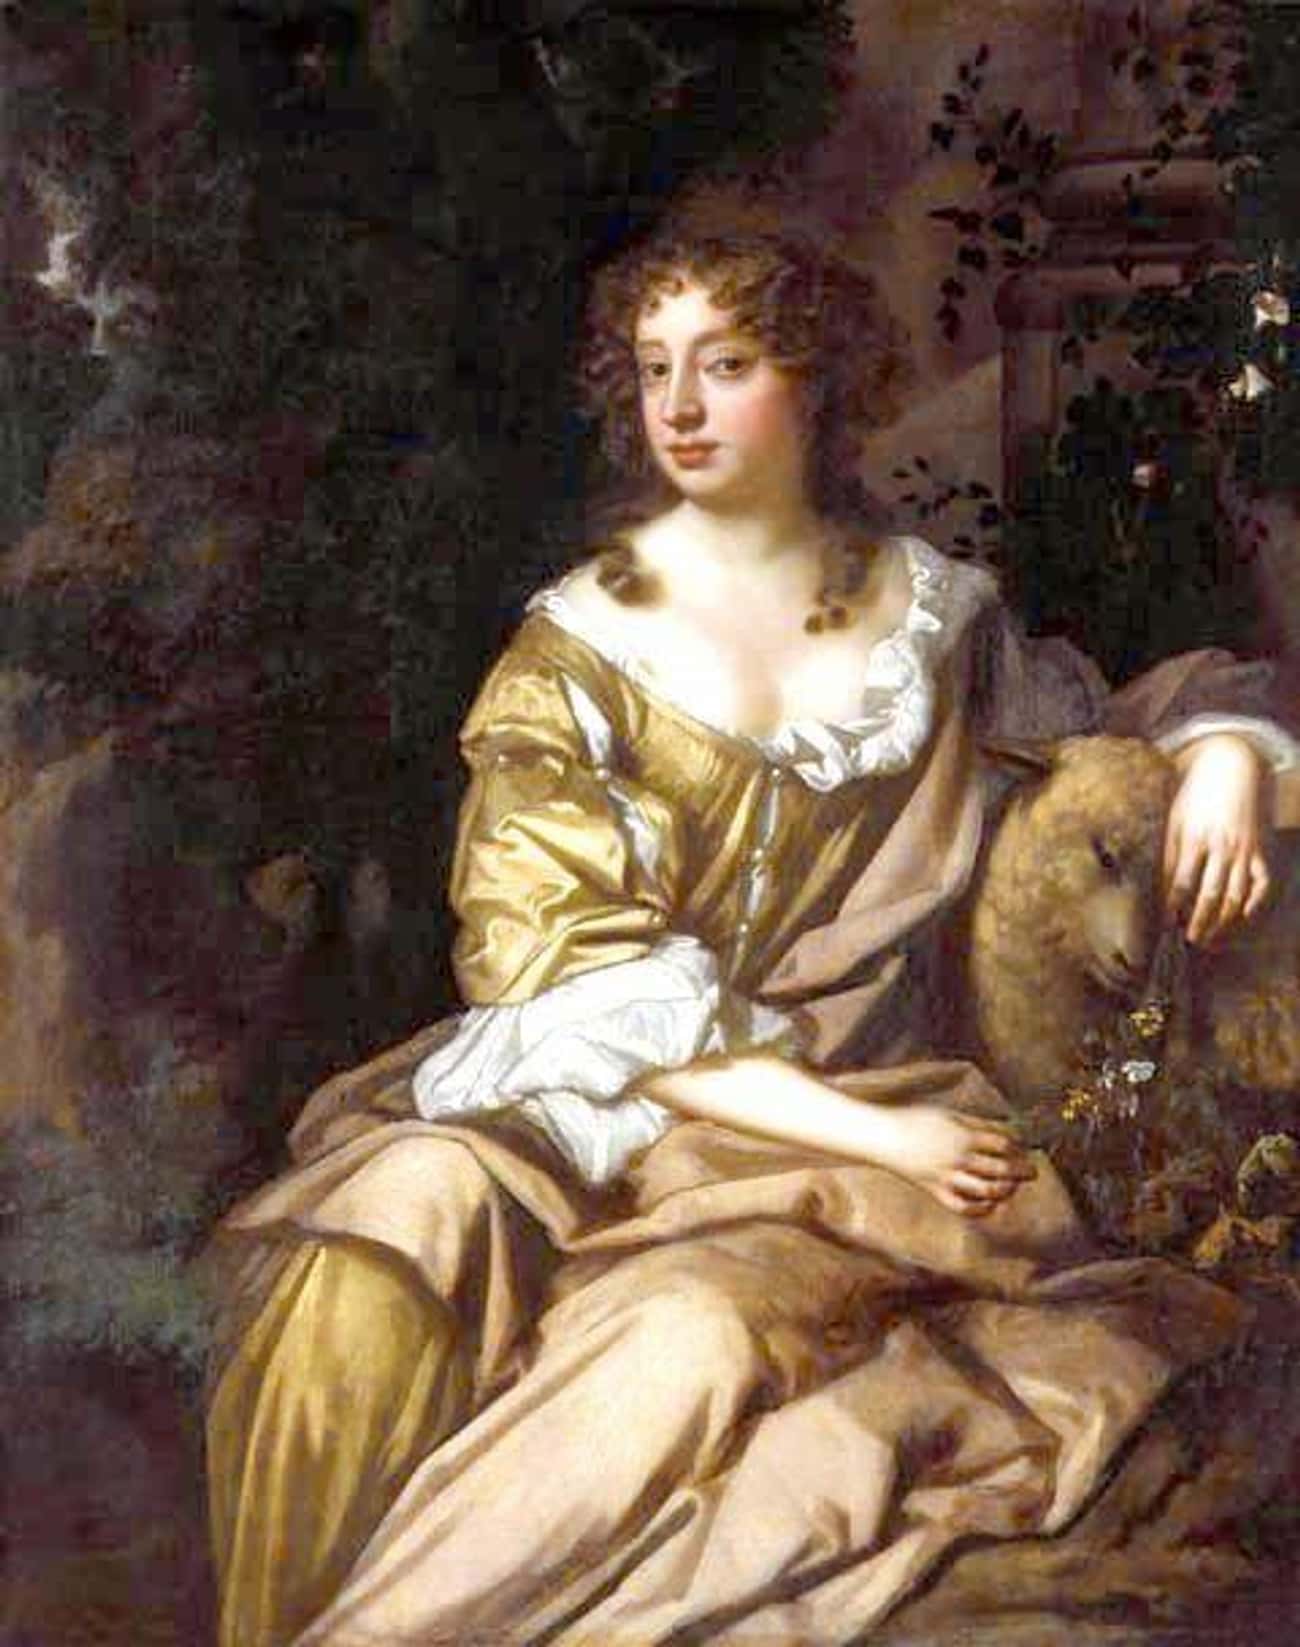 Nell Gwynn - One Of Charles's Favorite Mistresses - Became A Folk Hero